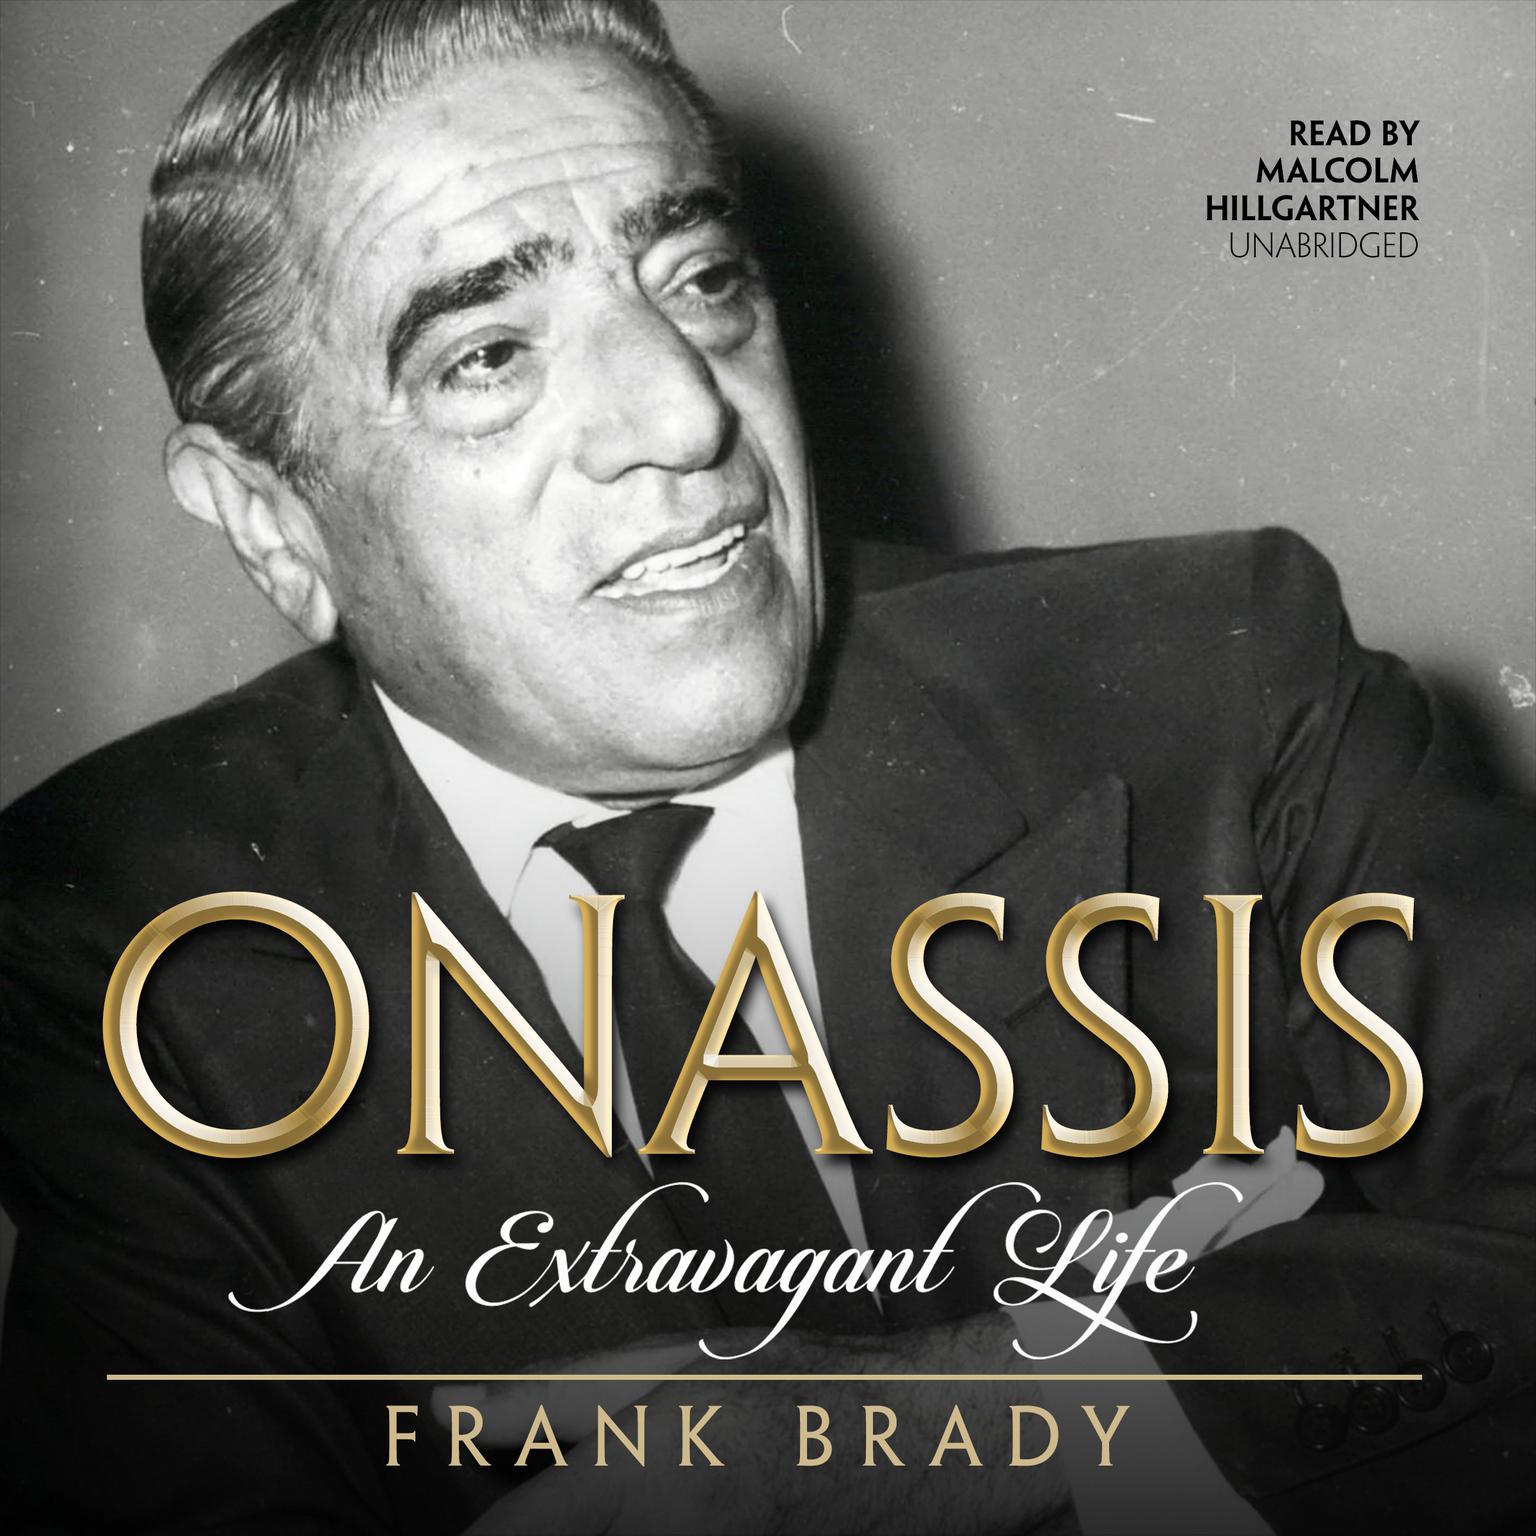 Onassis: An Extravagant Life Audiobook, by Frank Brady